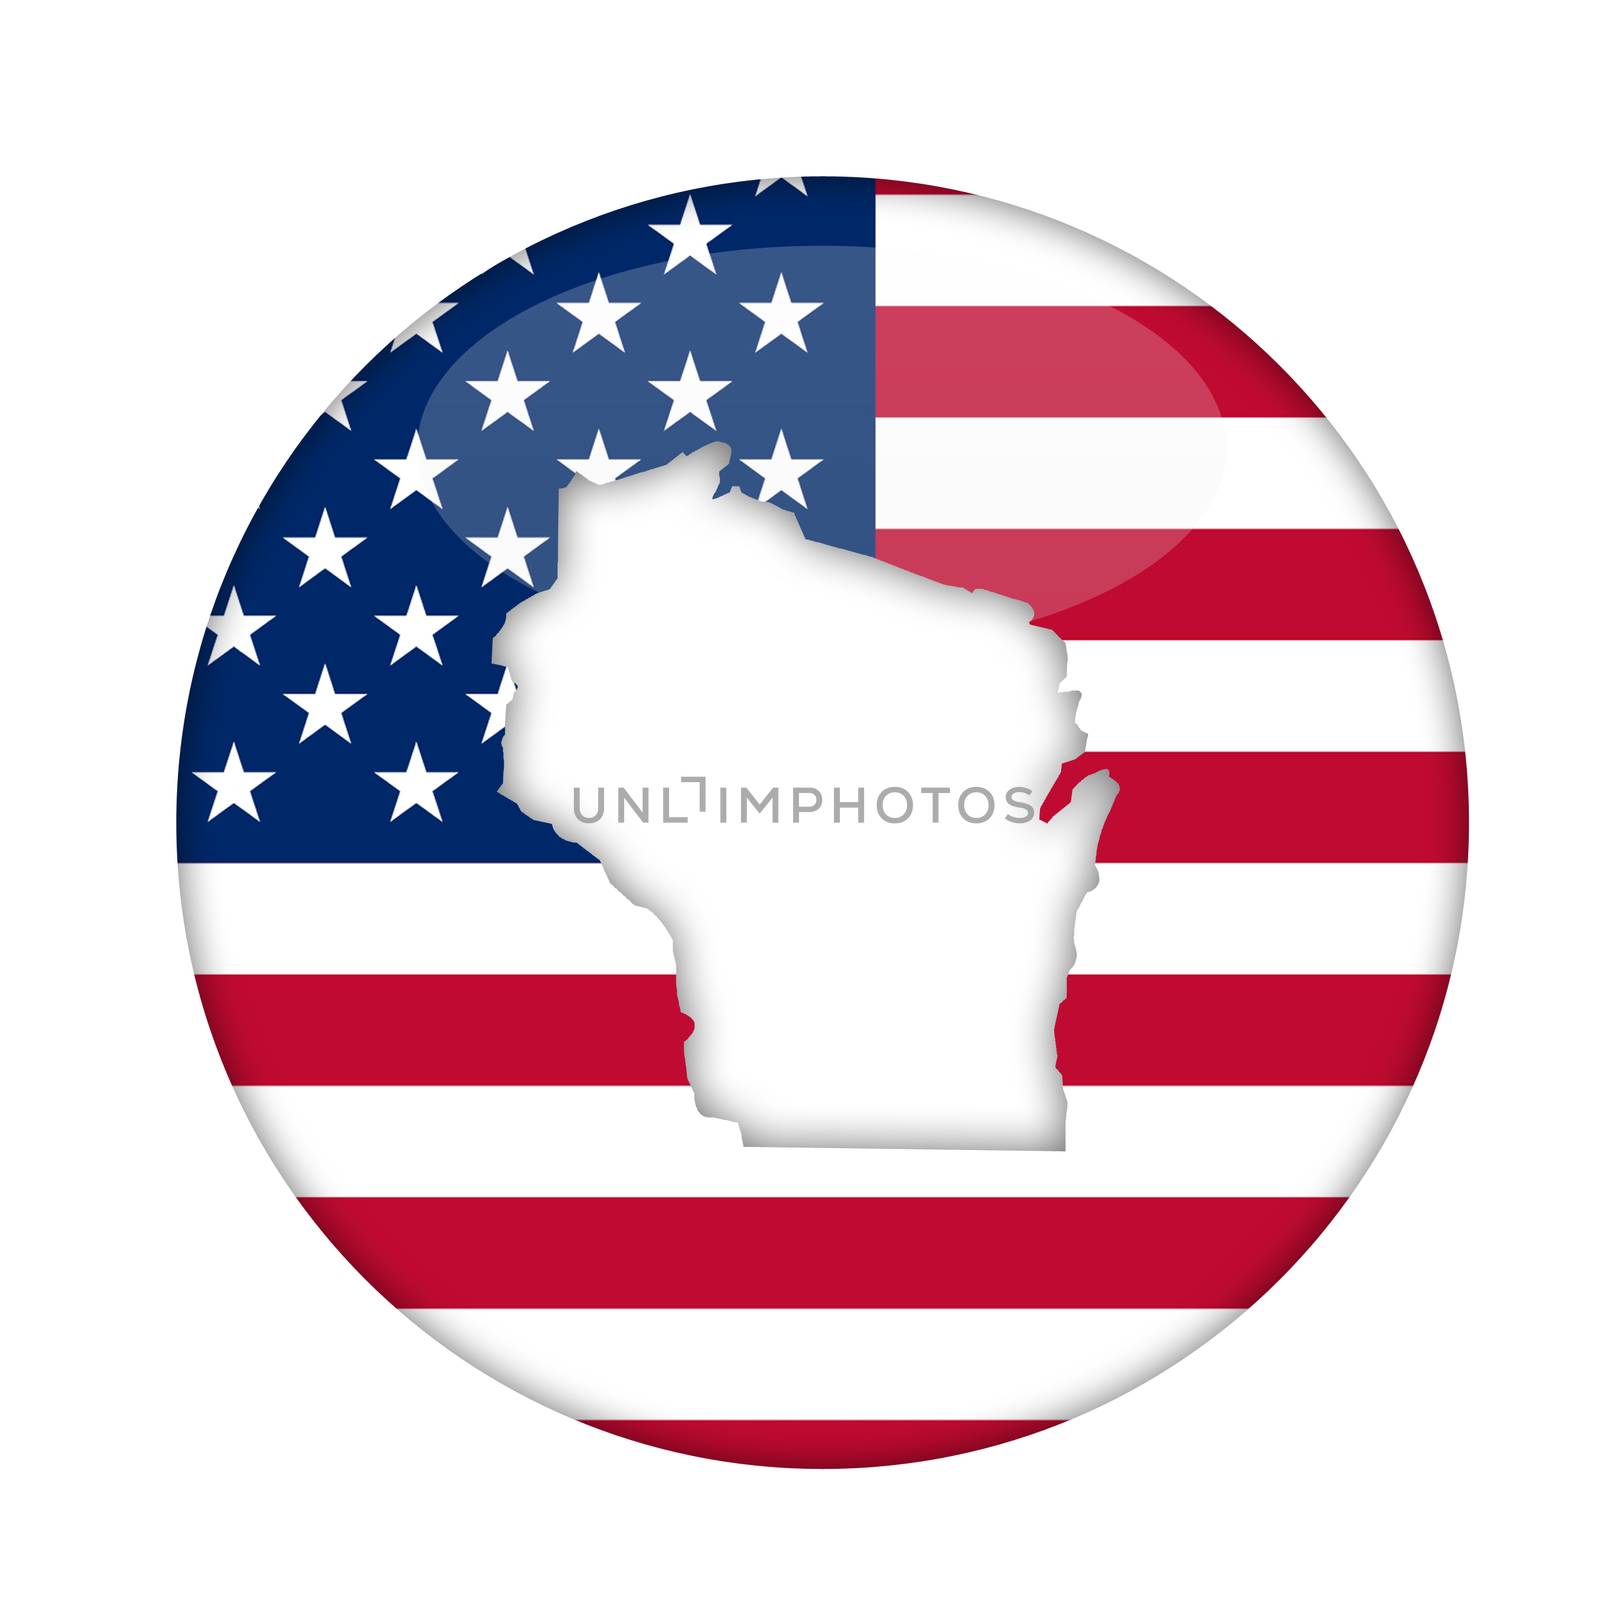 Wisconsin state of America badge isolated on a white background.